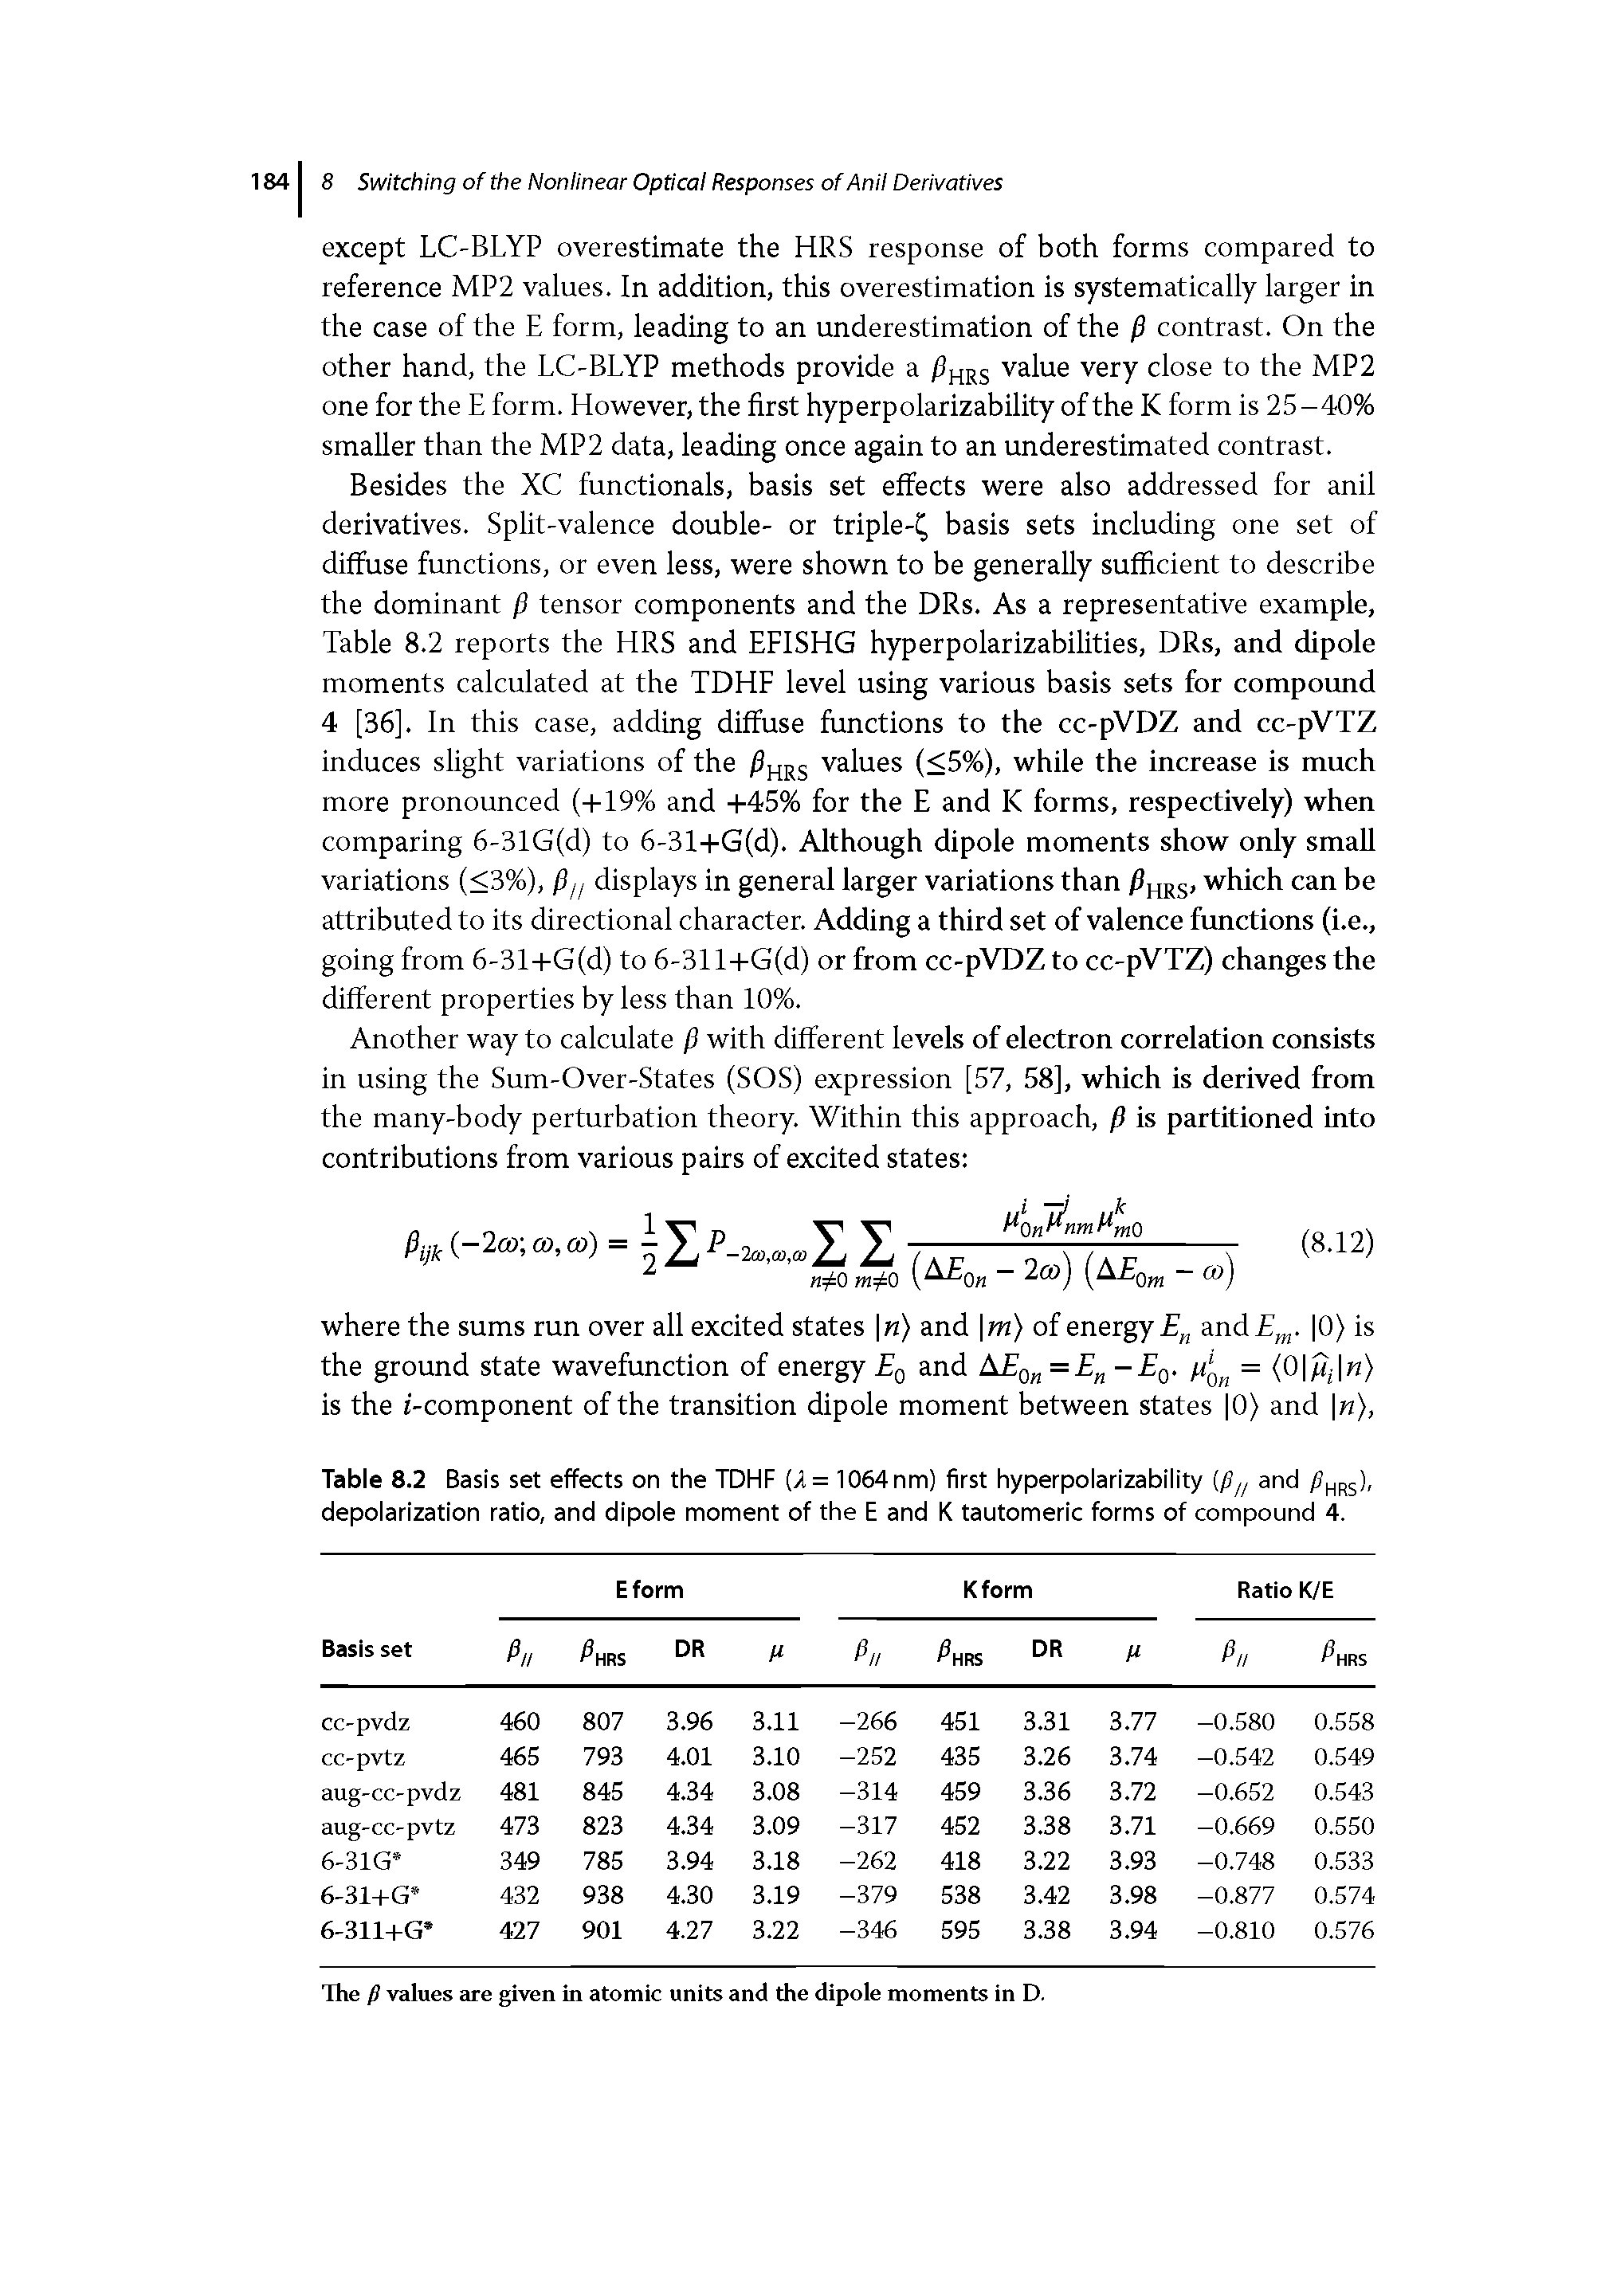 Table 8.2 Basis set effects on the TDHF (2= 1064nm) first hyperpolarizability (fSn and hrsI depolarization ratio, and dipole moment of the E and K tautomeric forms of compound 4.